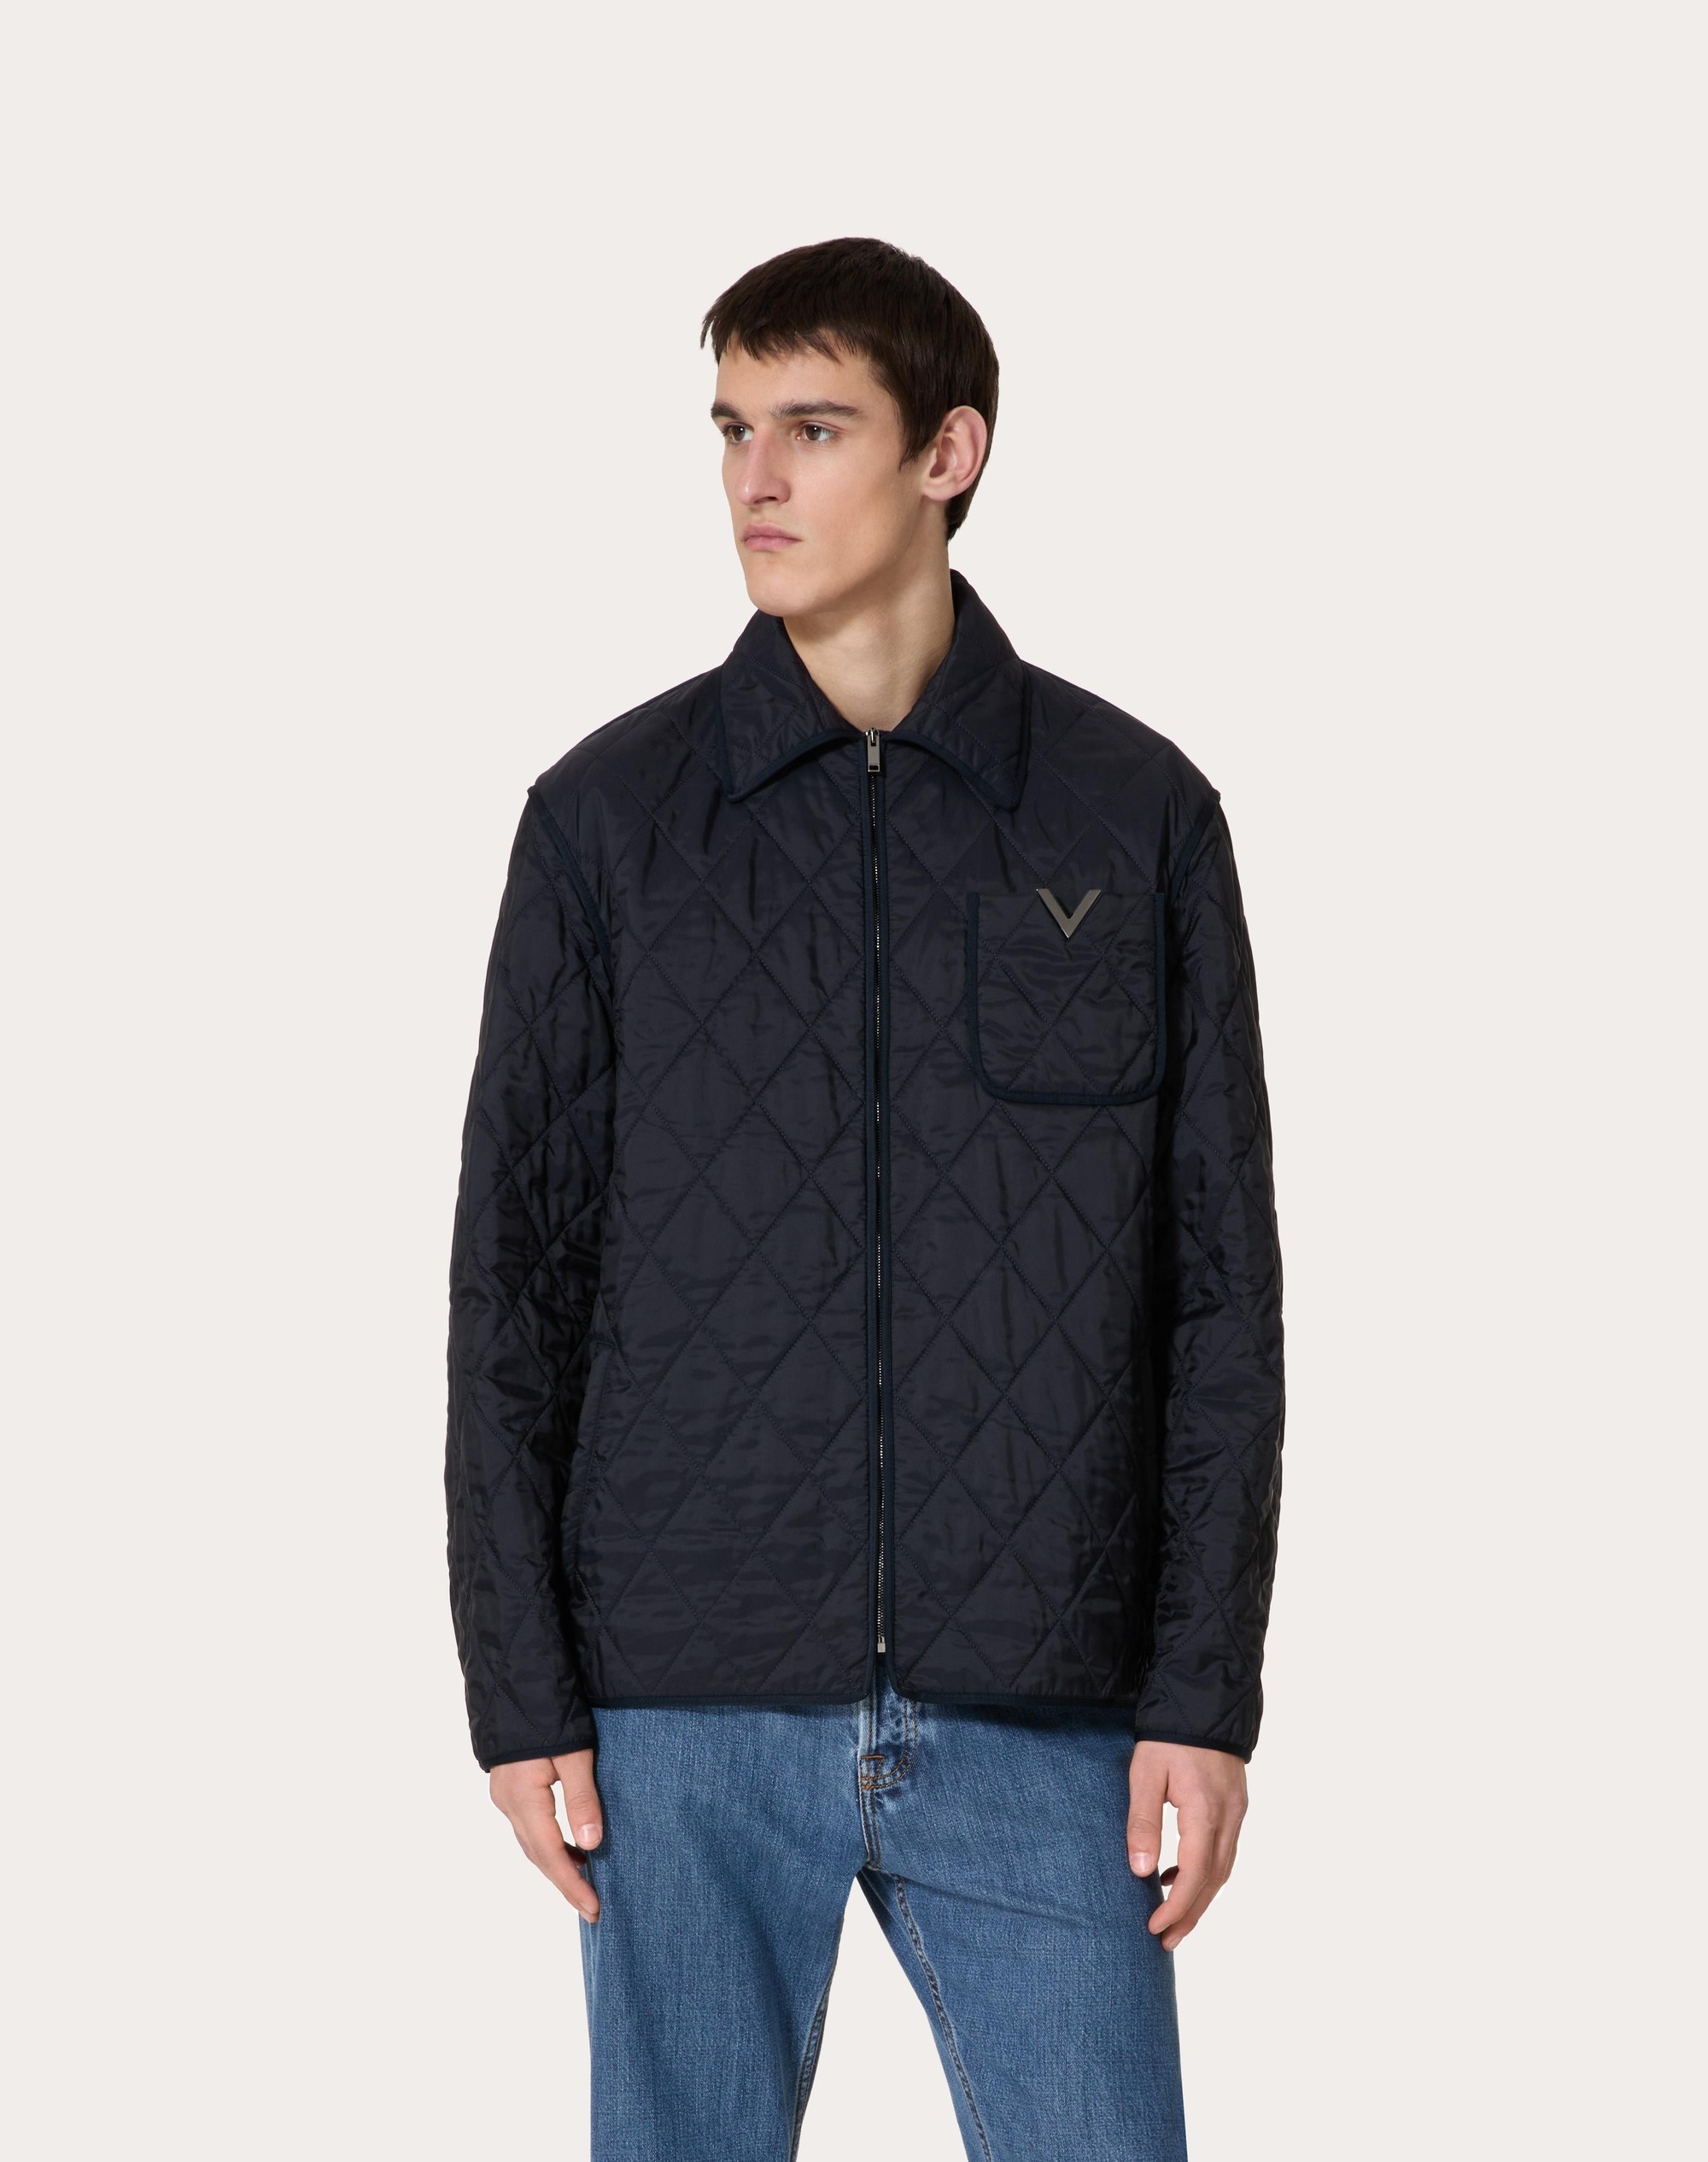 QUILTED NYLON SHIRT JACKET WITH METALLIC V DETAIL - 3